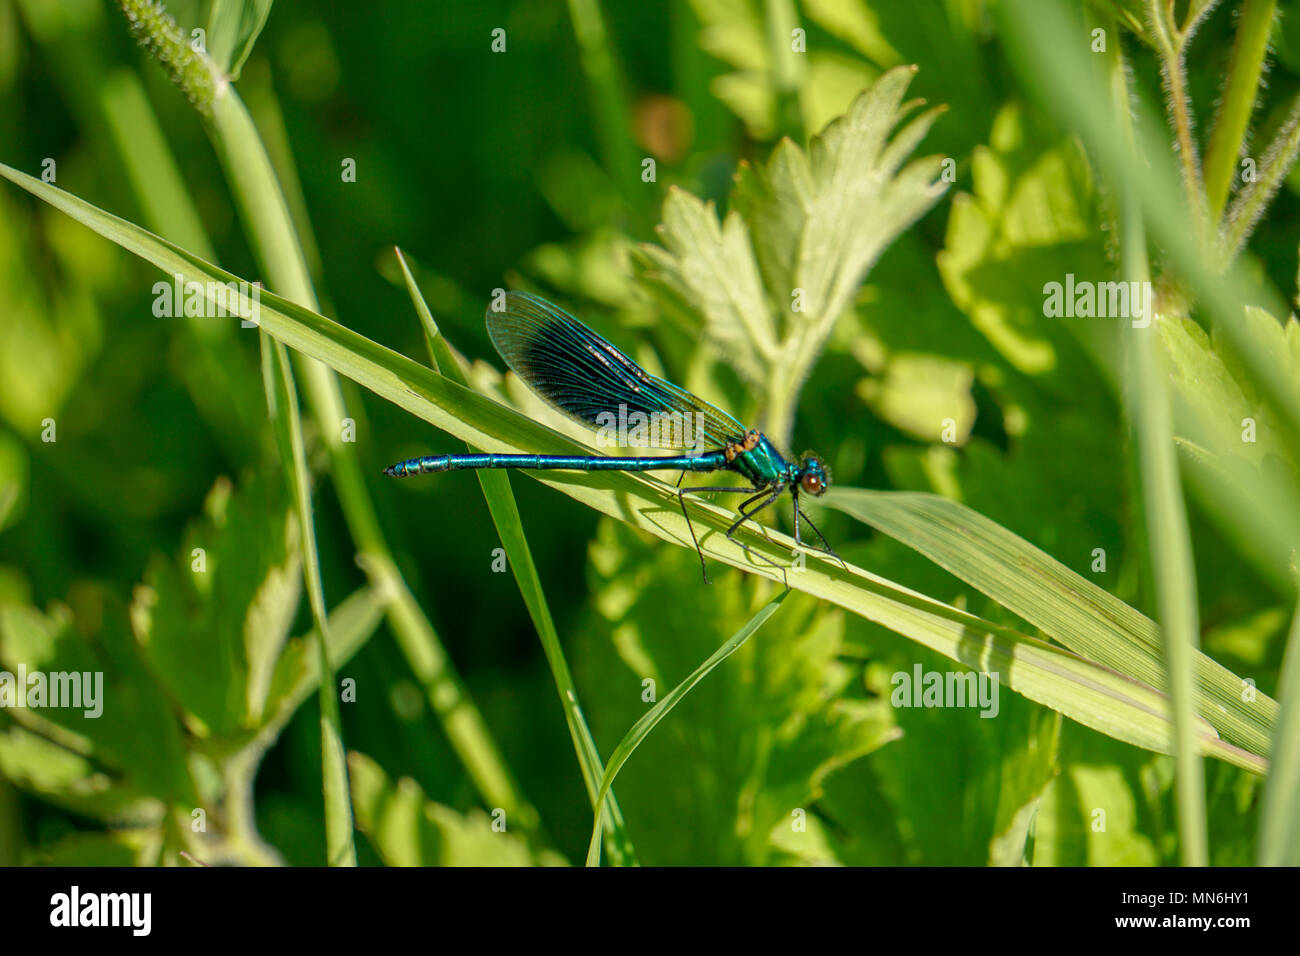 The dragonfly on the grass Stock Photo